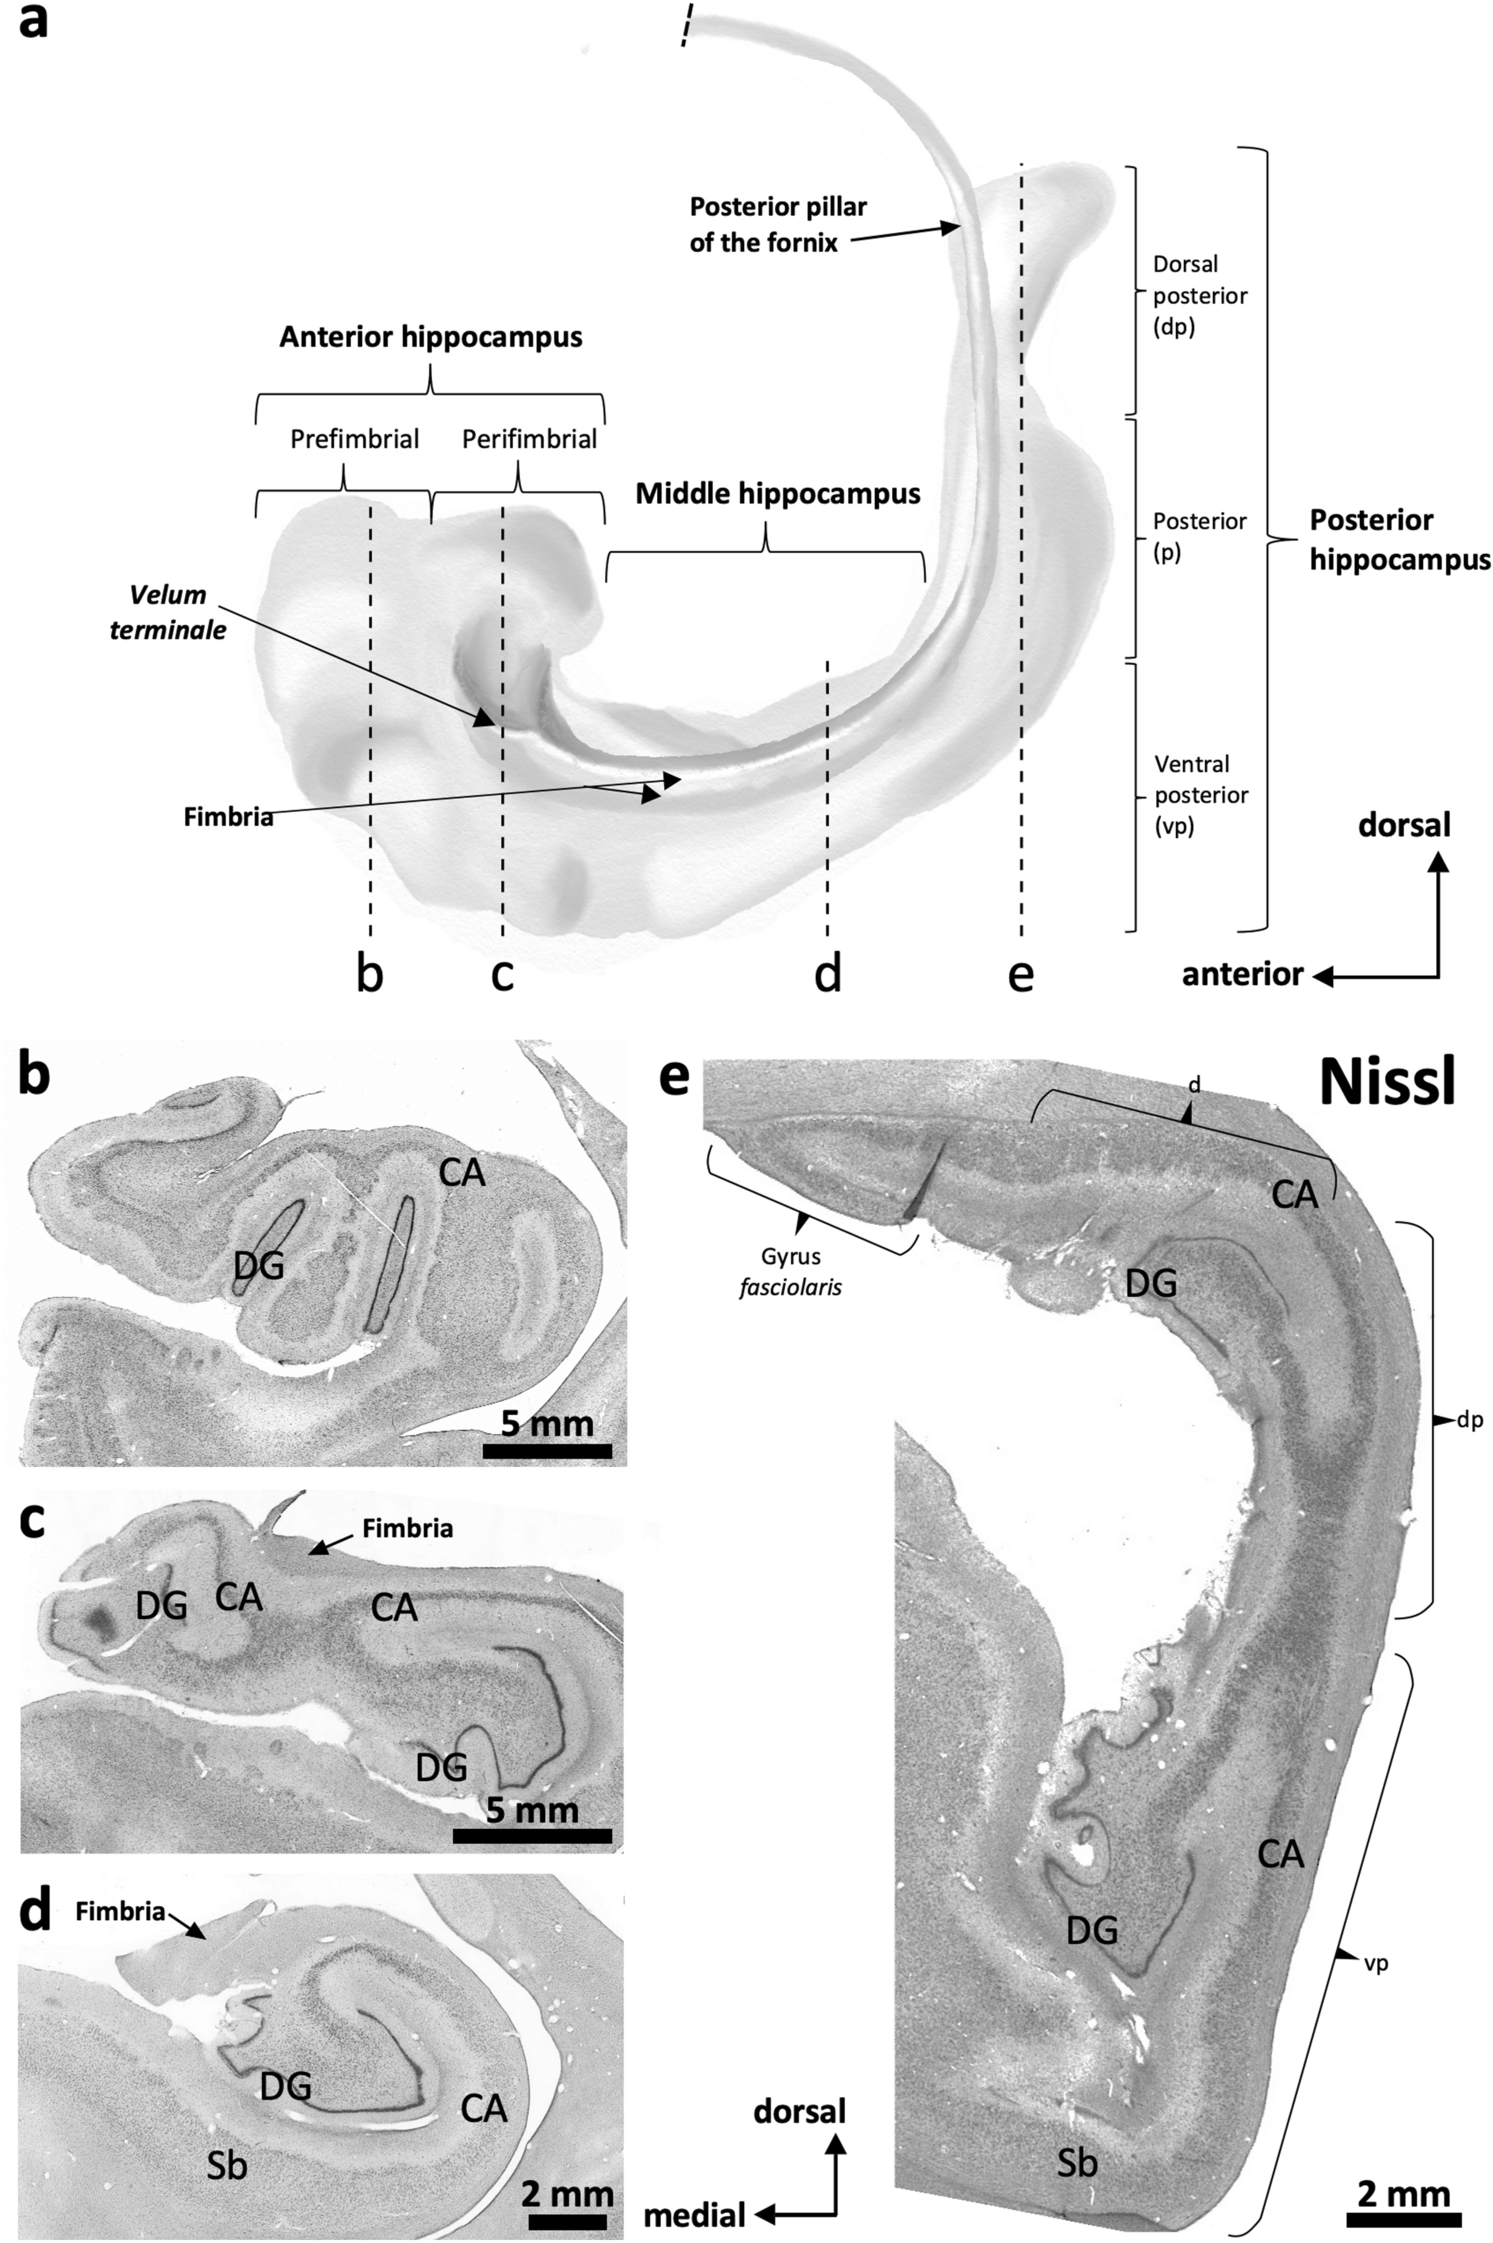 Immunohistochemical field parcellation of the human hippocampus along its antero-posterior axis